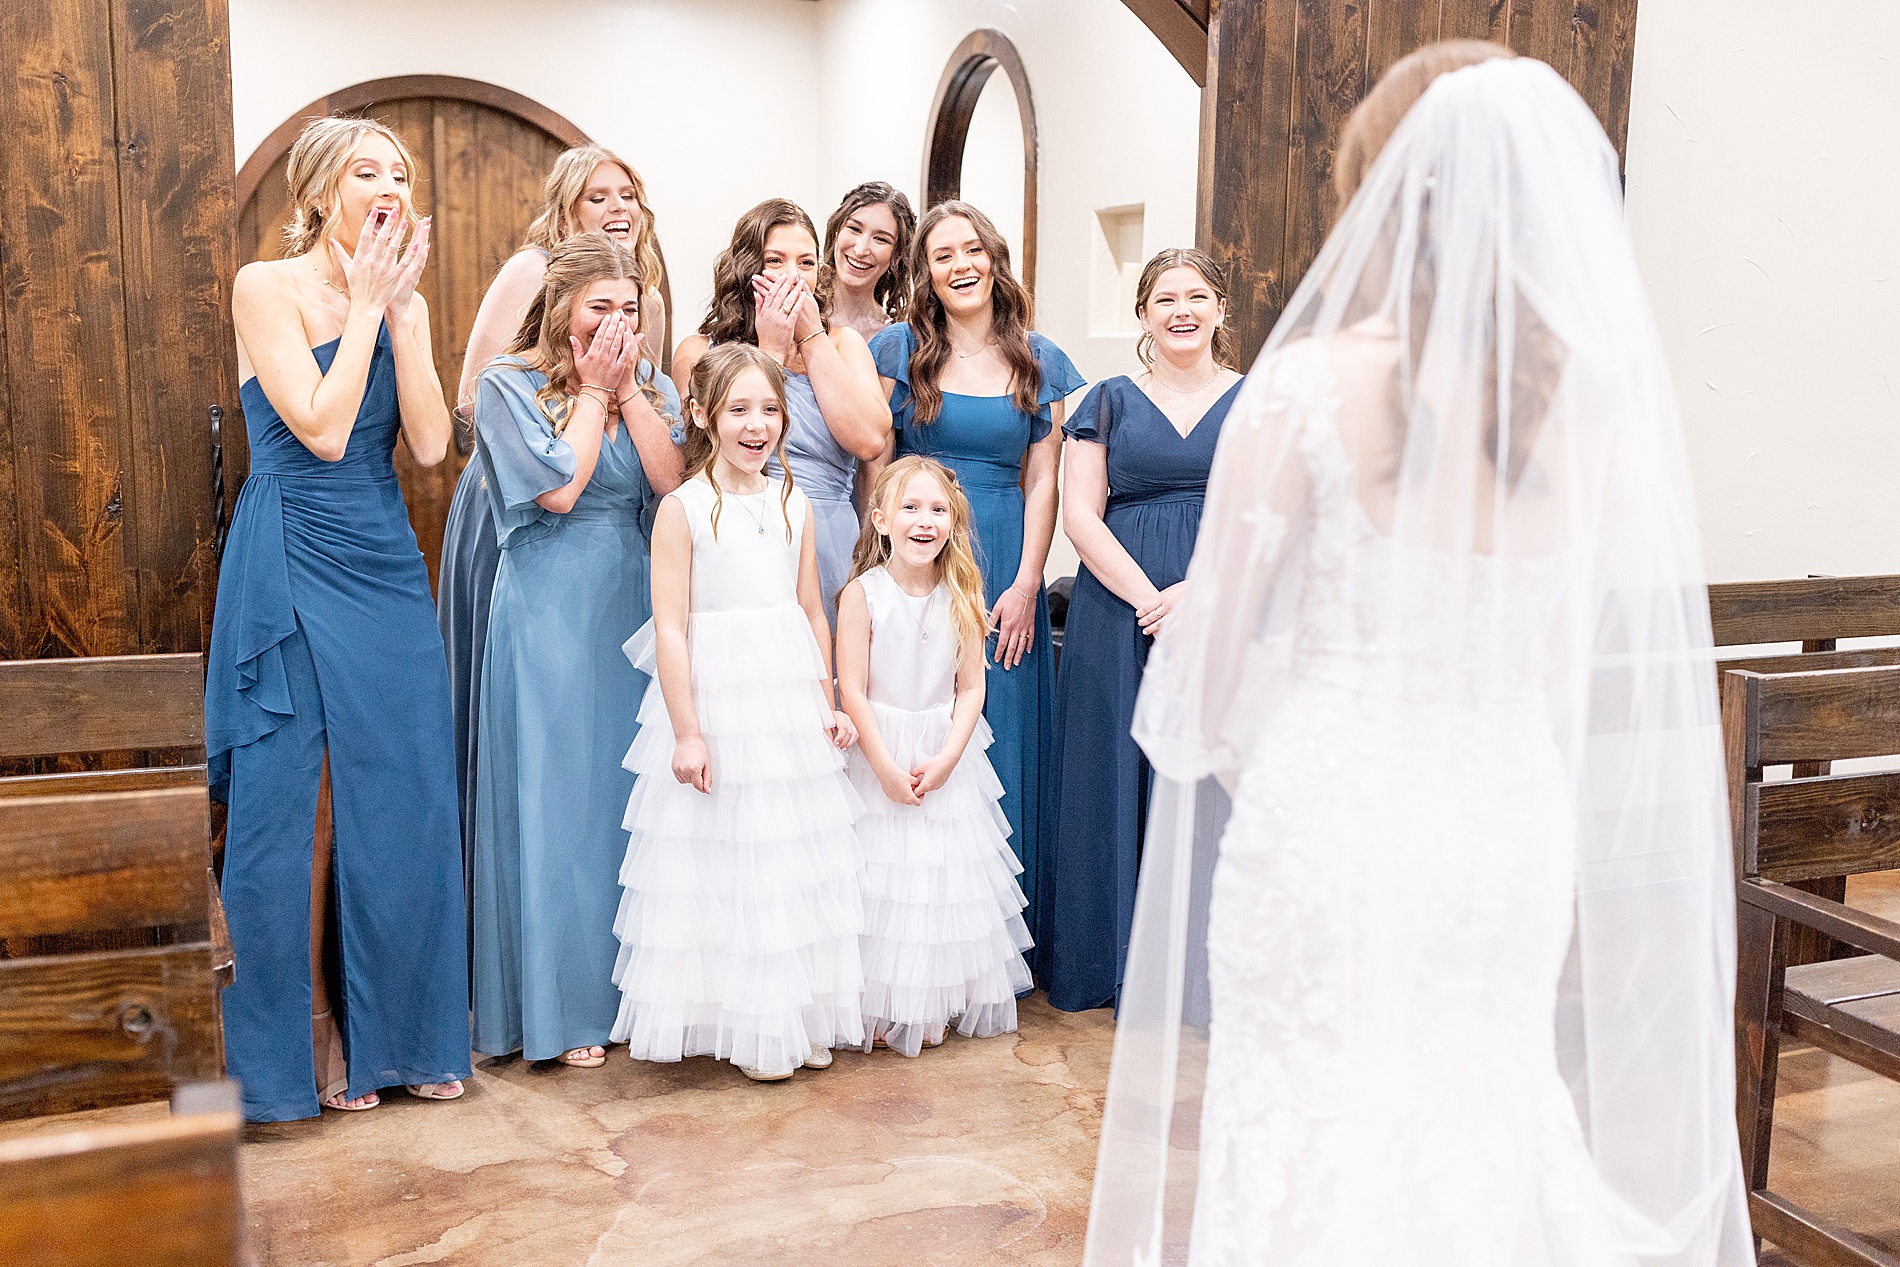 bridesmaids react to seeing bride for the first time in wedding dress